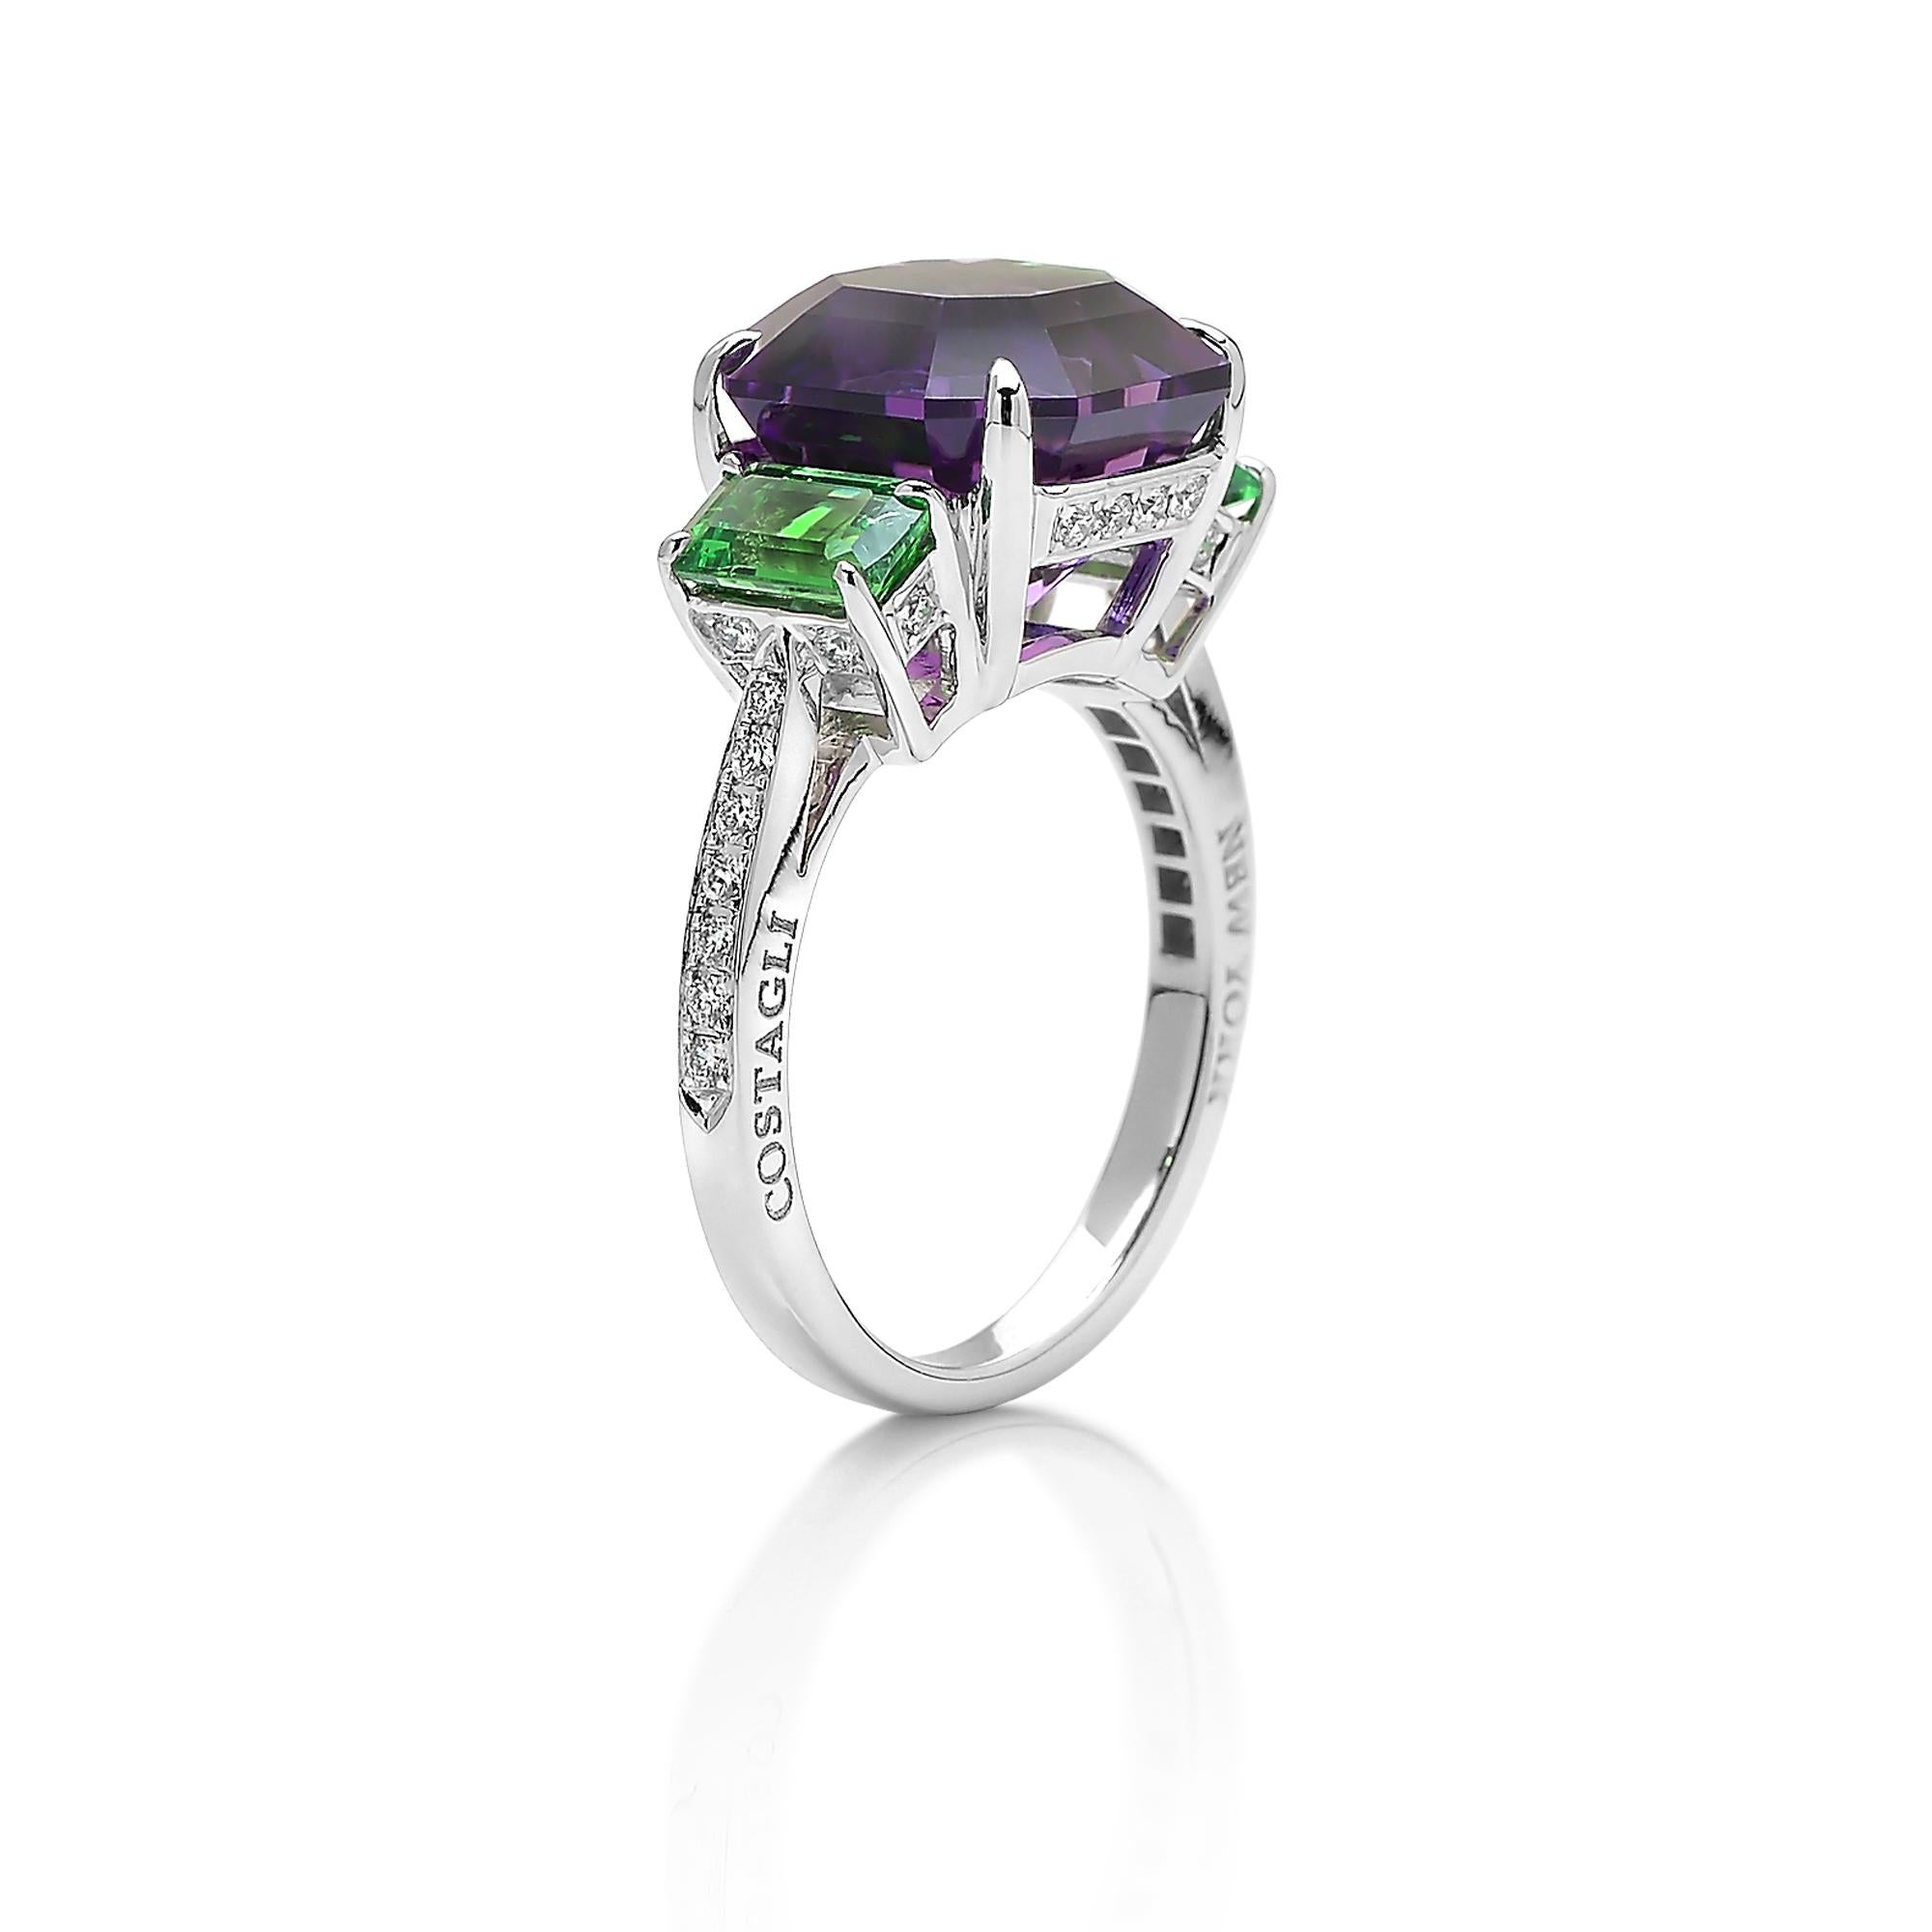 One of a kind asscher-cut amethyst ring with emerald-cut tsavorite garnet side stones set in 18 karat white gold with pave-set round, brilliant diamond detailing. 

The proportions of the ring allows the exquisite cutting of the gemstones to be